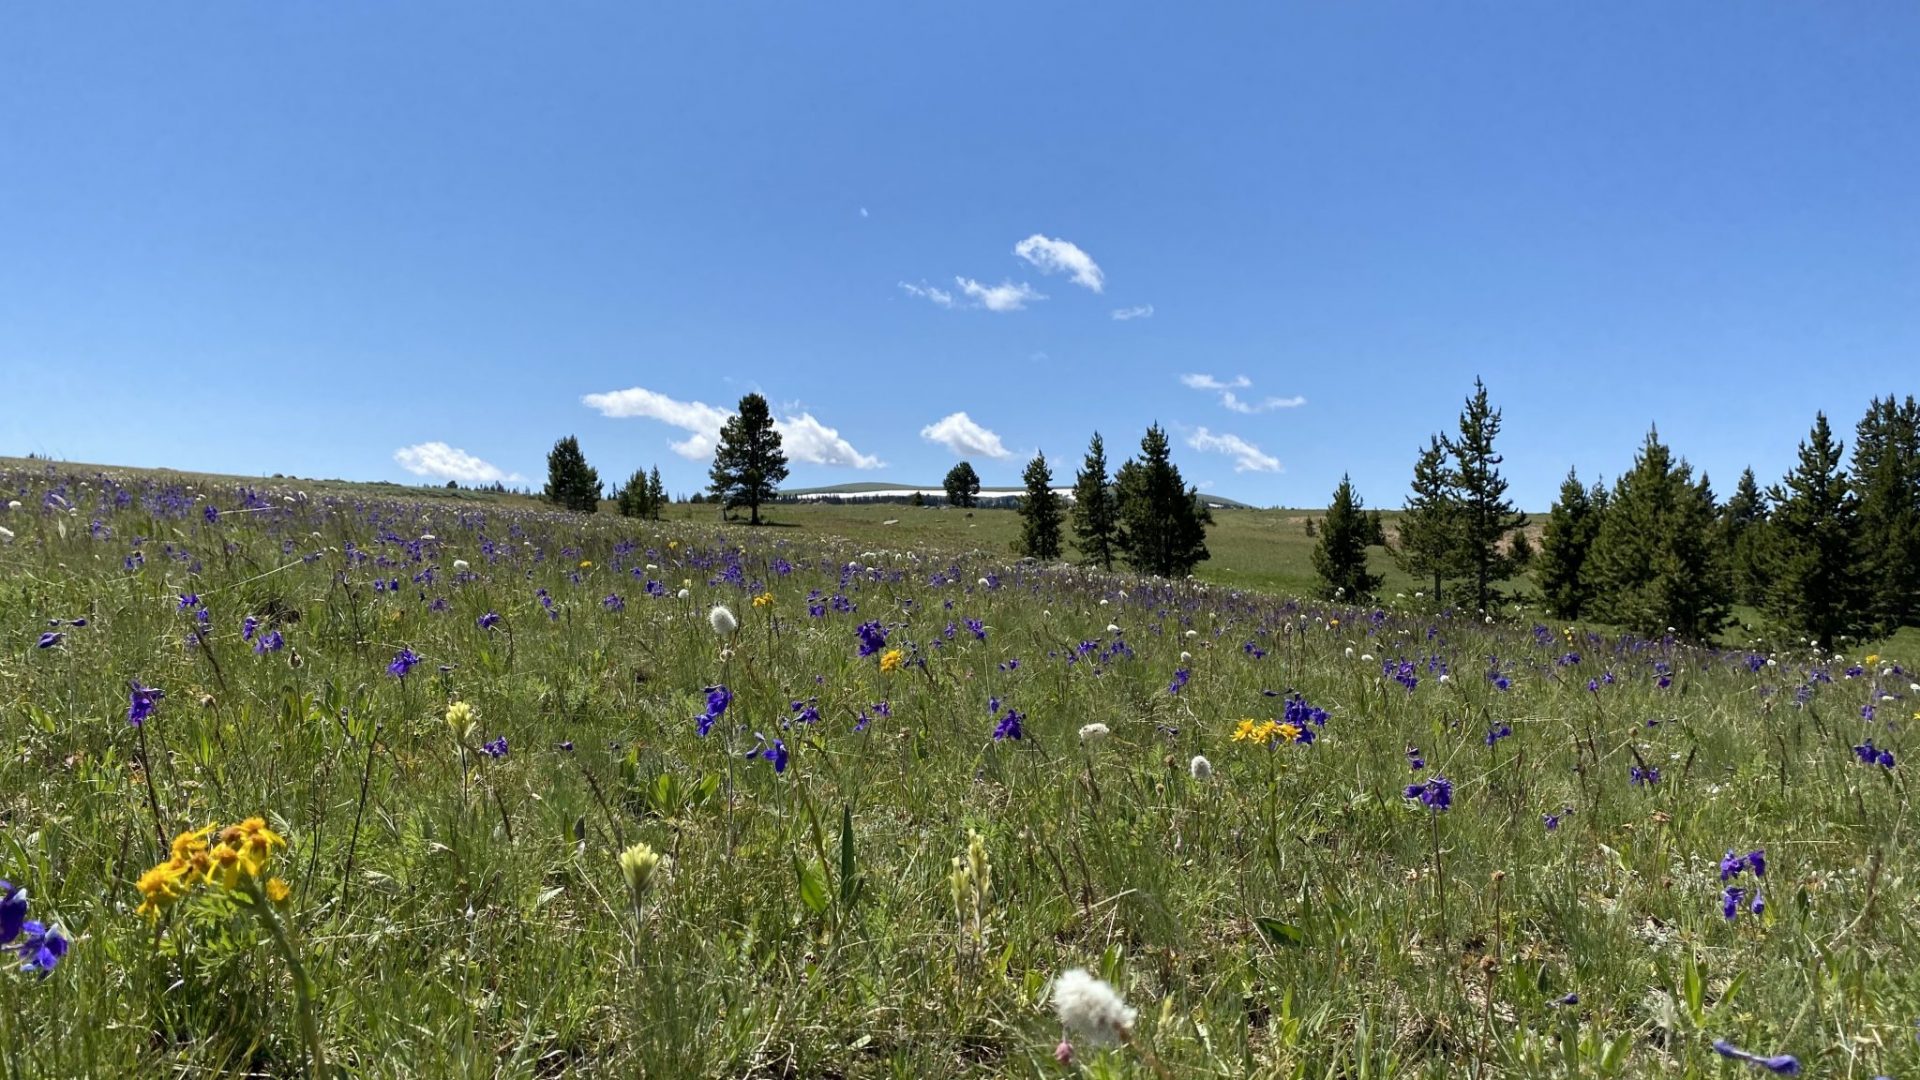 Wyoming High Country Lodge Bighorn Mountains recreation resort wild flowers